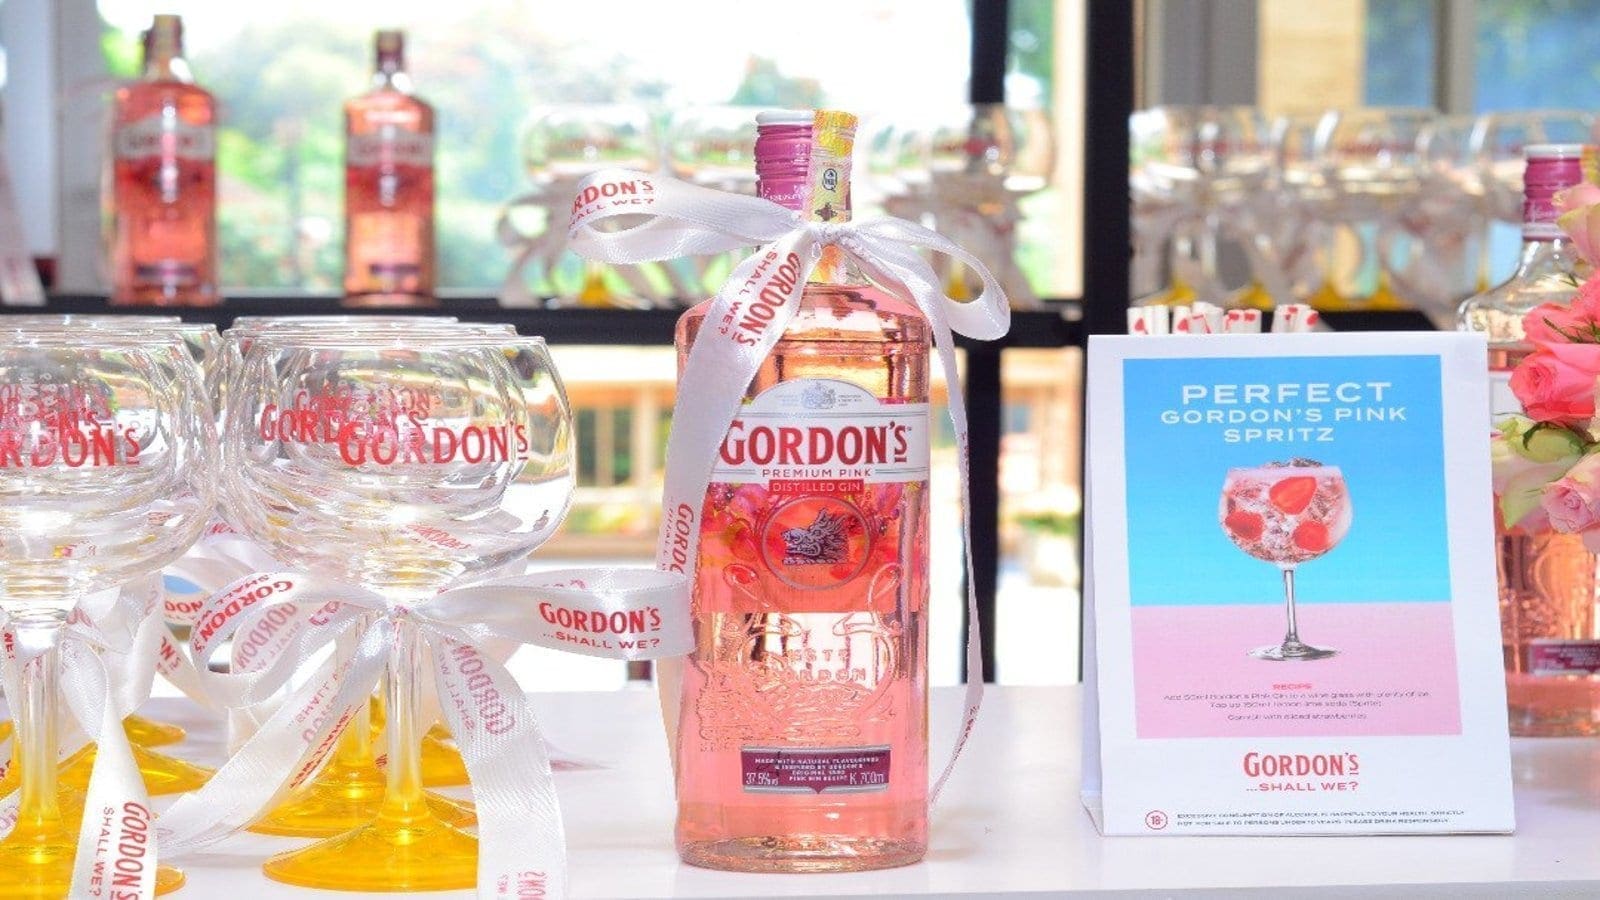 Uganda Breweries Limited introduces new variant of Gordon’s Gin